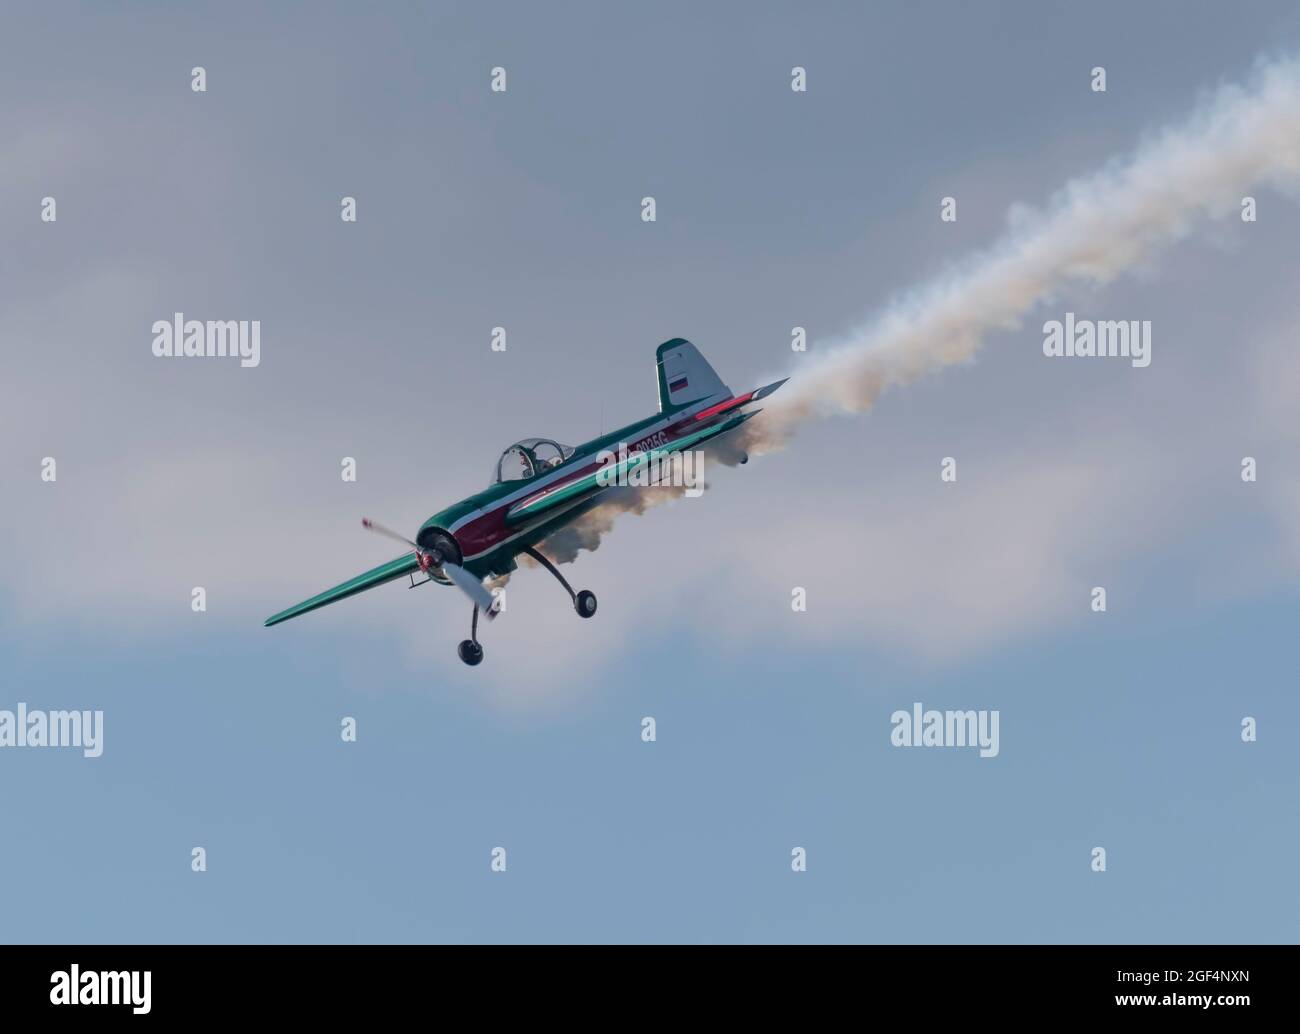 MOSCOW REGION, CHERNOE AIRFIELD 22 May 2021: airplane yak-55 the Sky aviation festival, theory and practice. Stock Photo